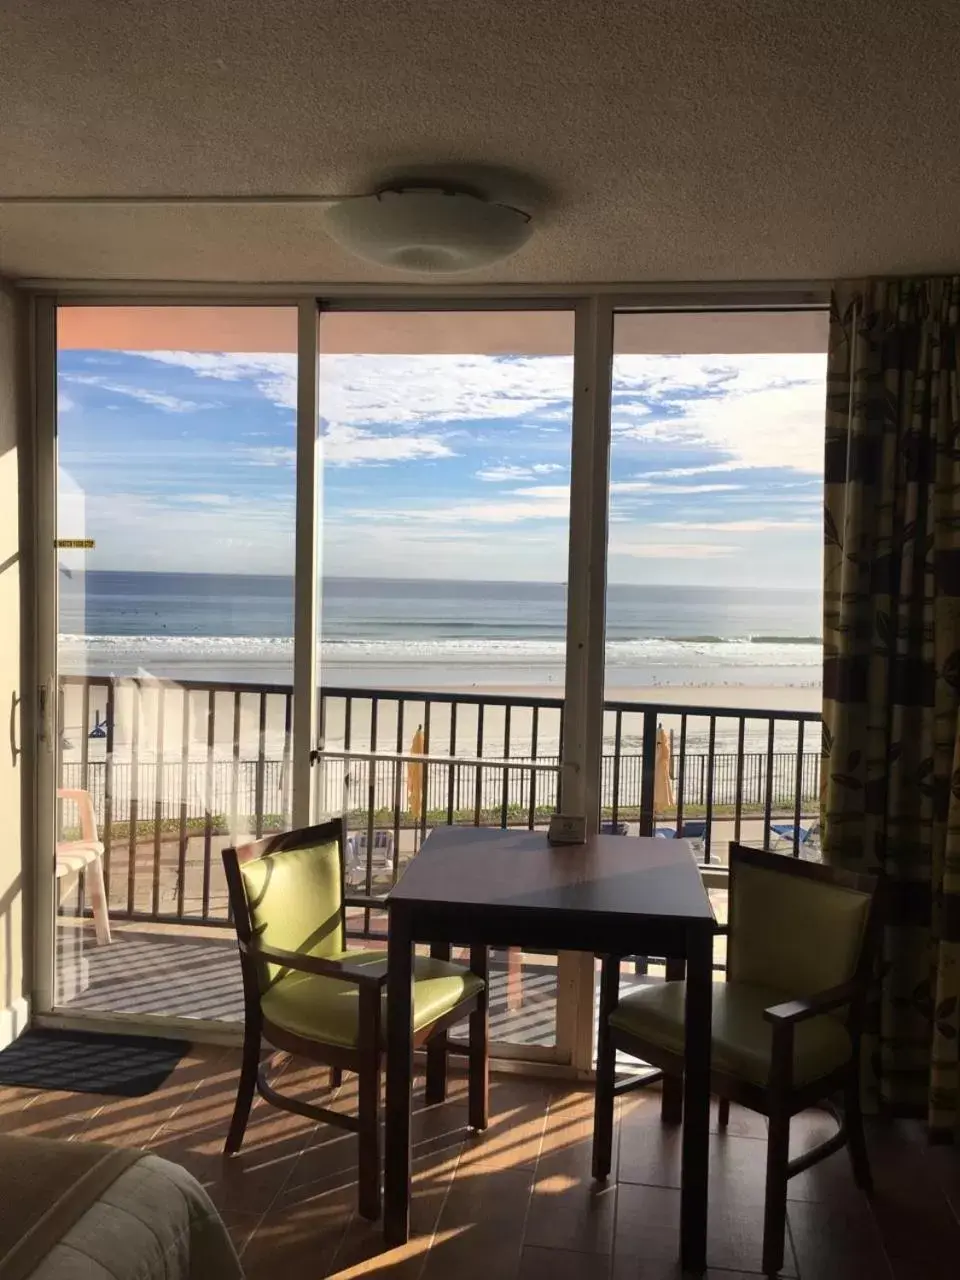 Sea view in Cove Motel Oceanfront